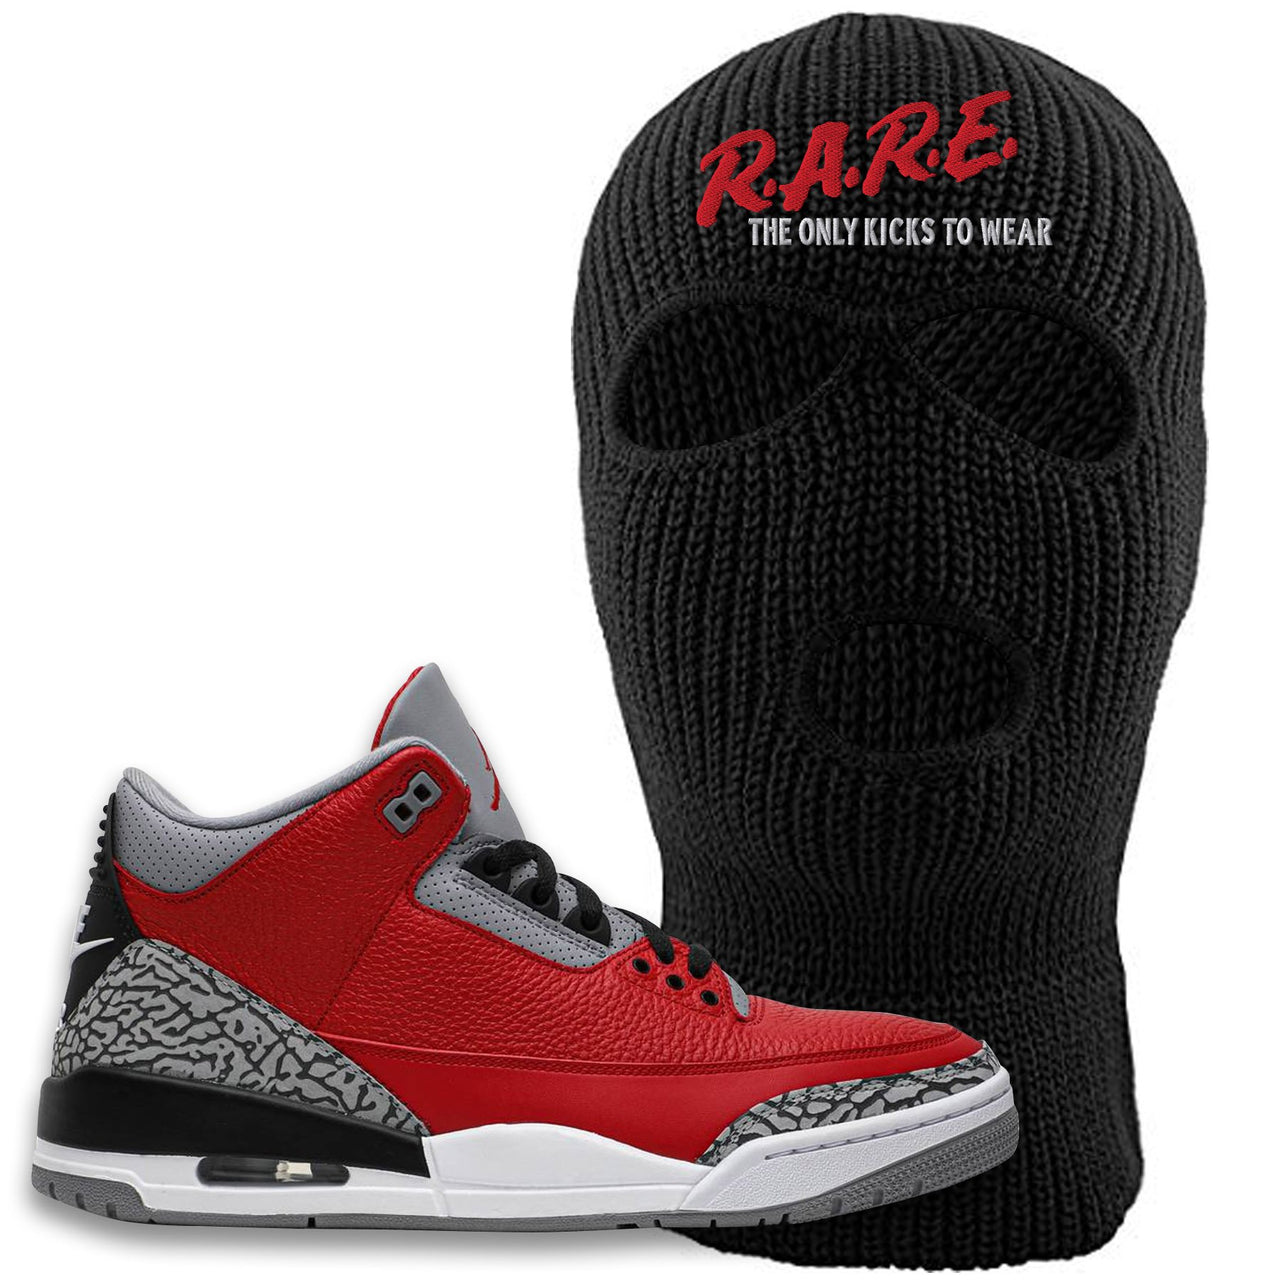 Jordan 3 Red Cement Chicago All-Star Sneaker Black Ski Mask | Winter Mask to match Jordan 3 All Star Red Cement Shoes | Rare